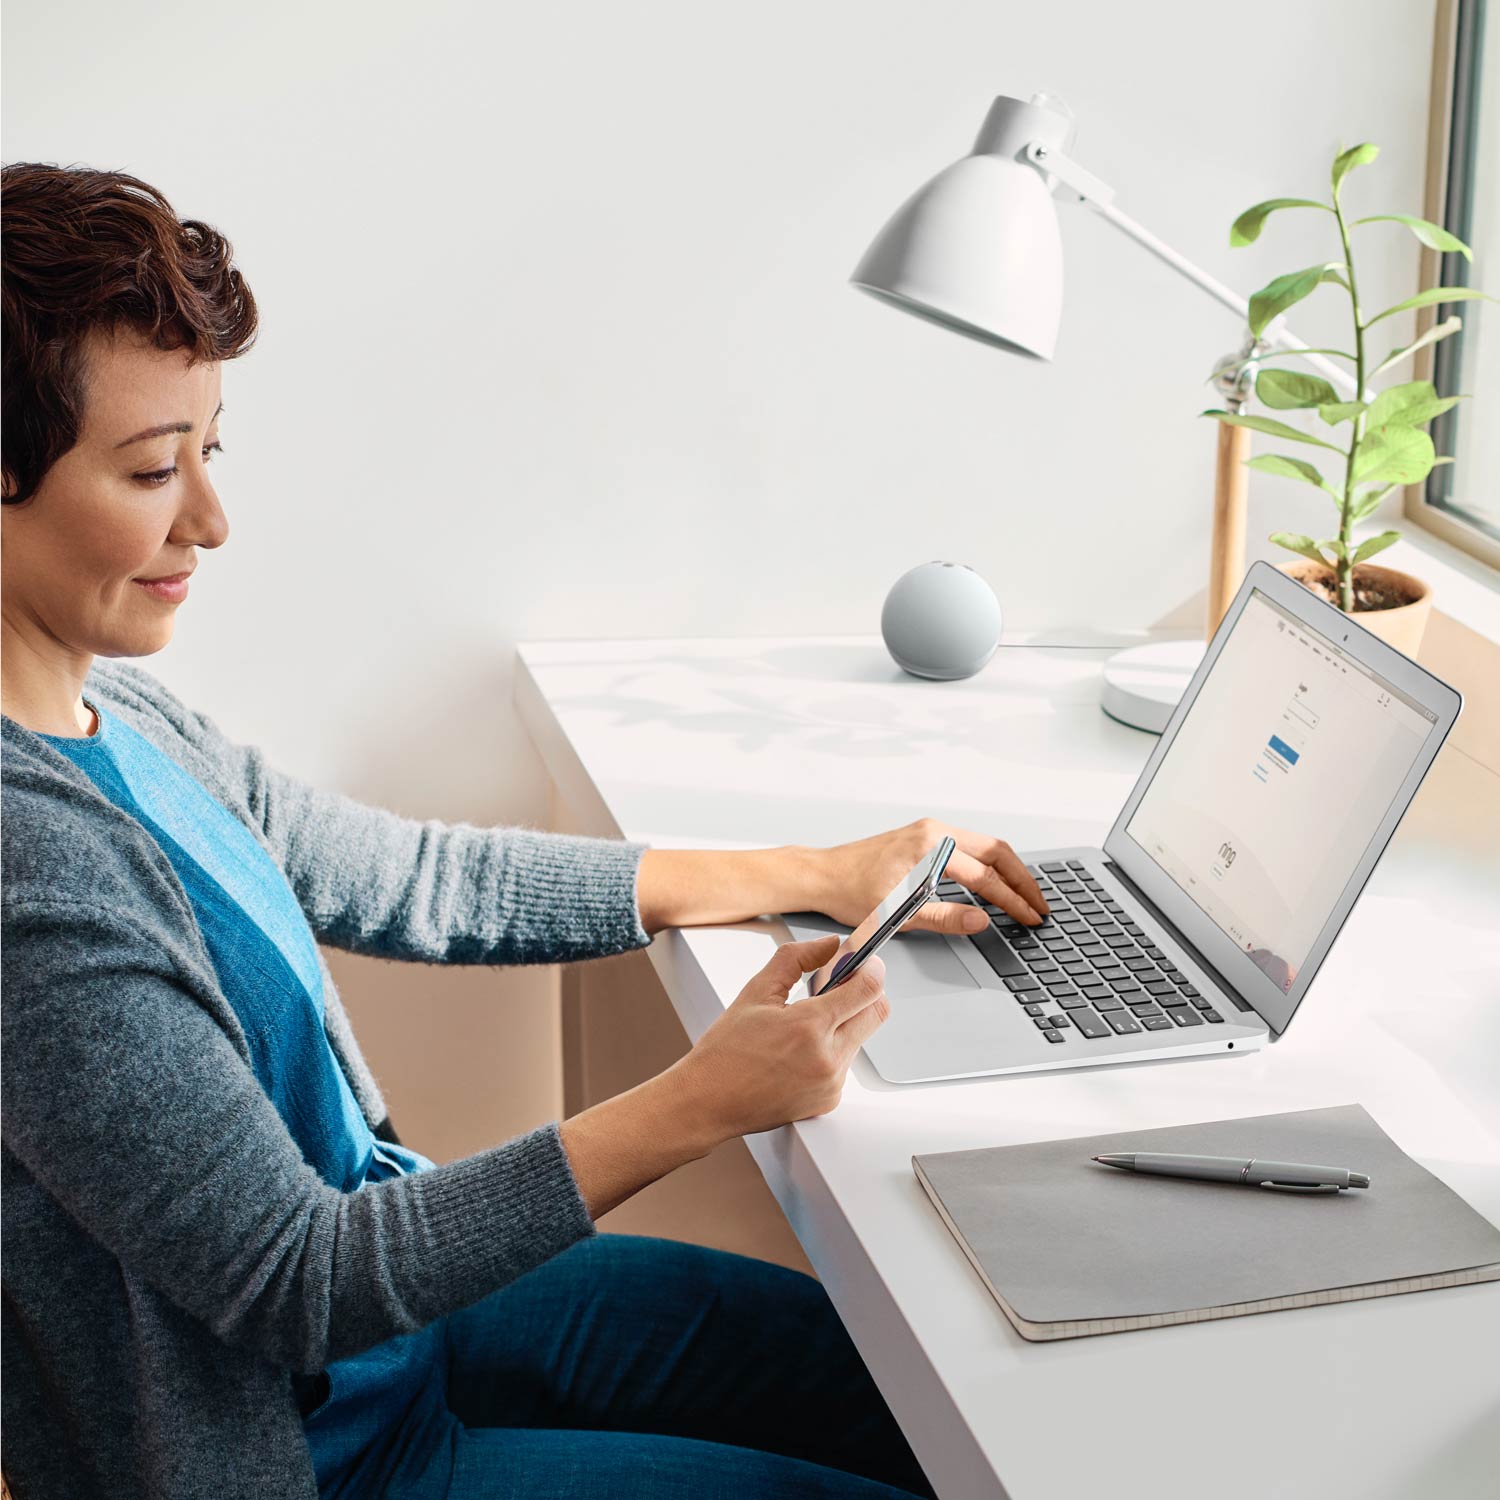 Alarm Pro, 13-Piece Kit (with built-in eero Wi-Fi 6 router and additional eero 6 Wi-Fi Router) - Side-view of woman sitting at desk in front of laptop with Ring web page loaded, looking at smartphone in her right hand.